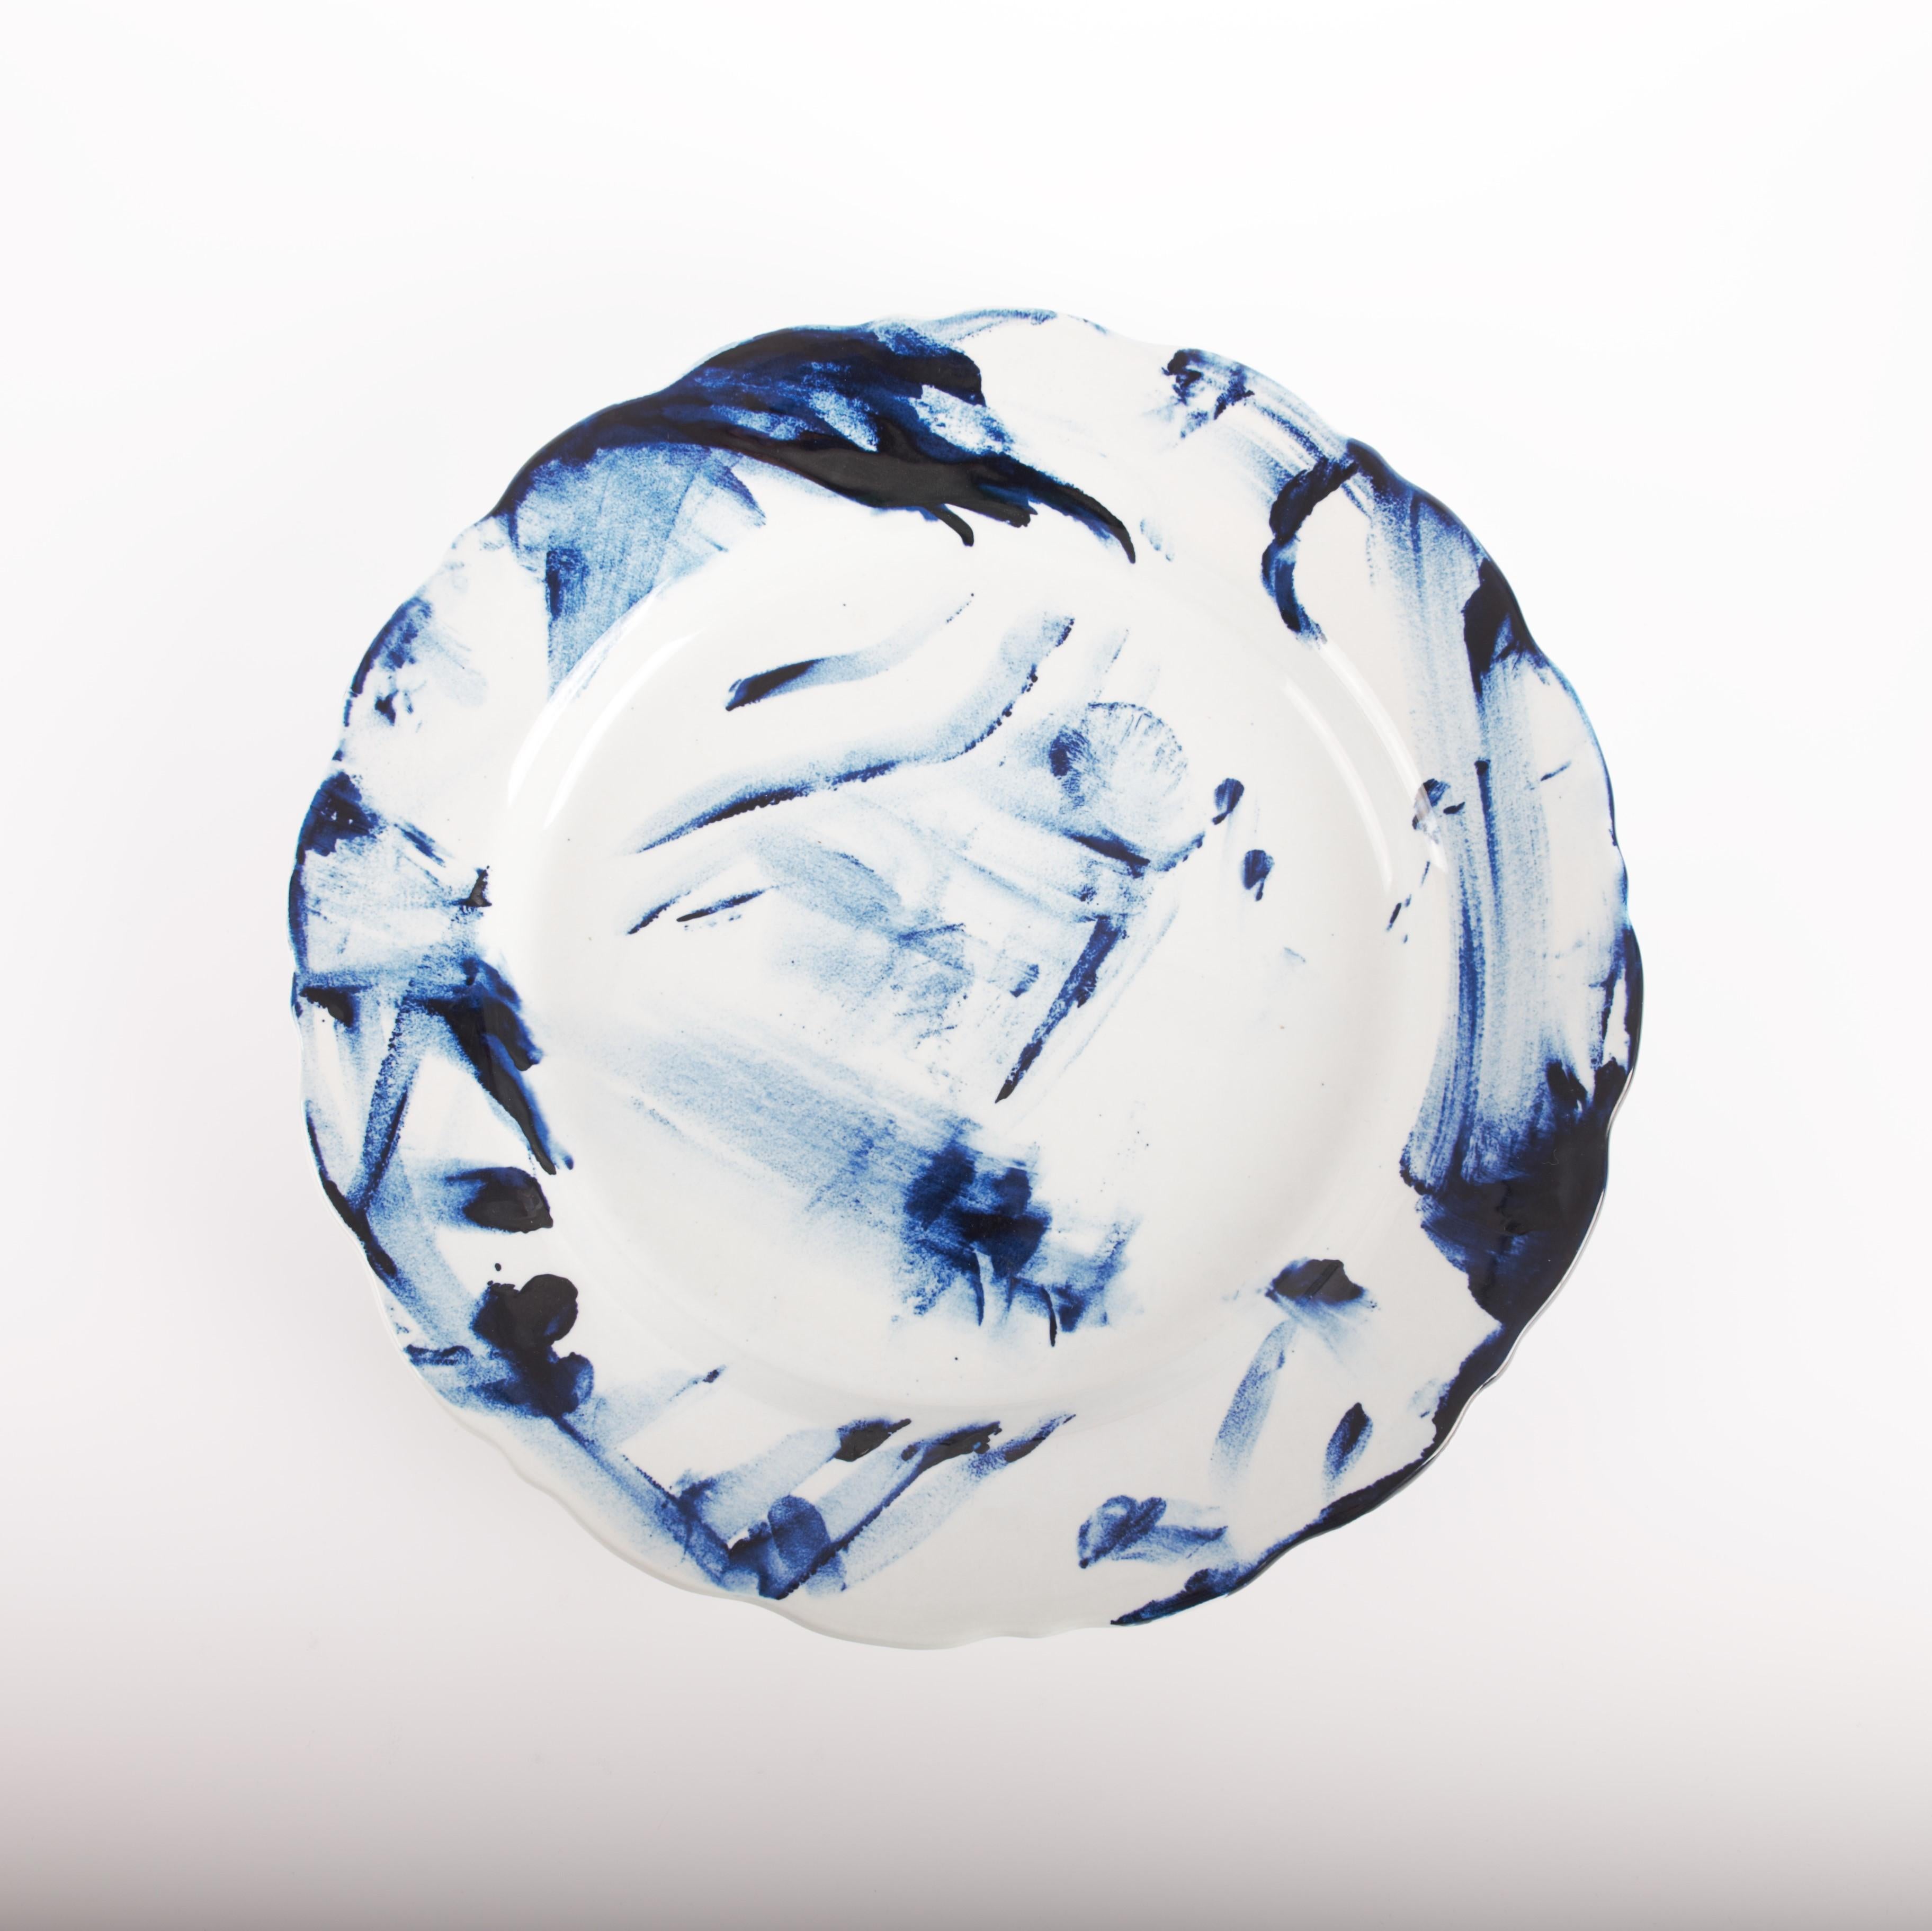 Glazed Set of two Delft Blue Plates, by Marcel Wanders, Hand-Painted, 2006, Unique For Sale